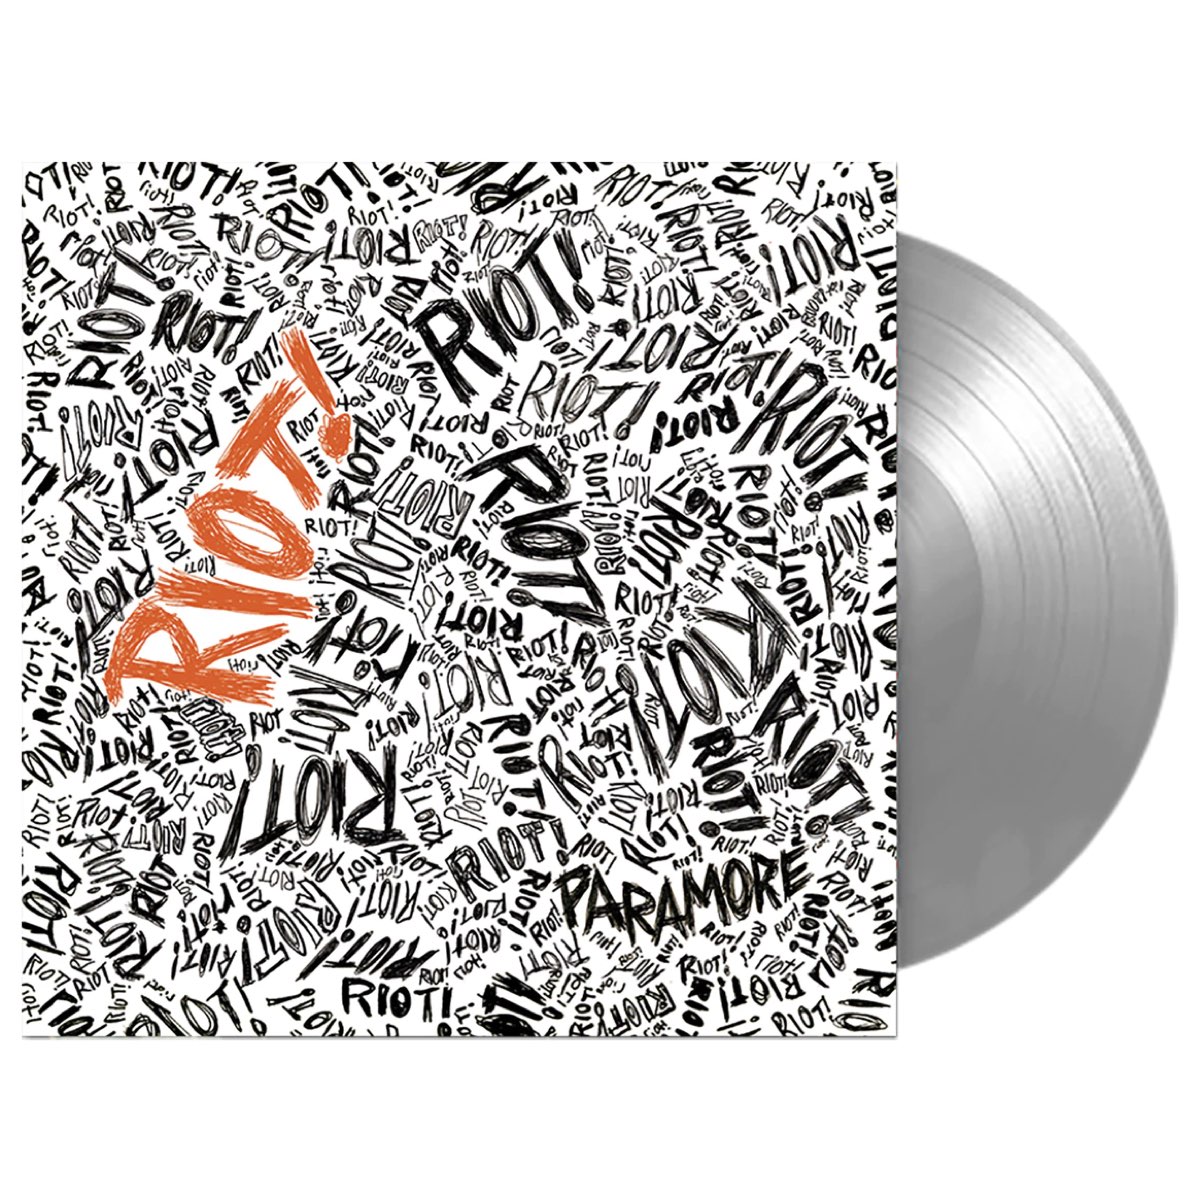 Paramore - Riot! [Fueled by Ramen 25th Anniversary Edition Silver Vinyl]